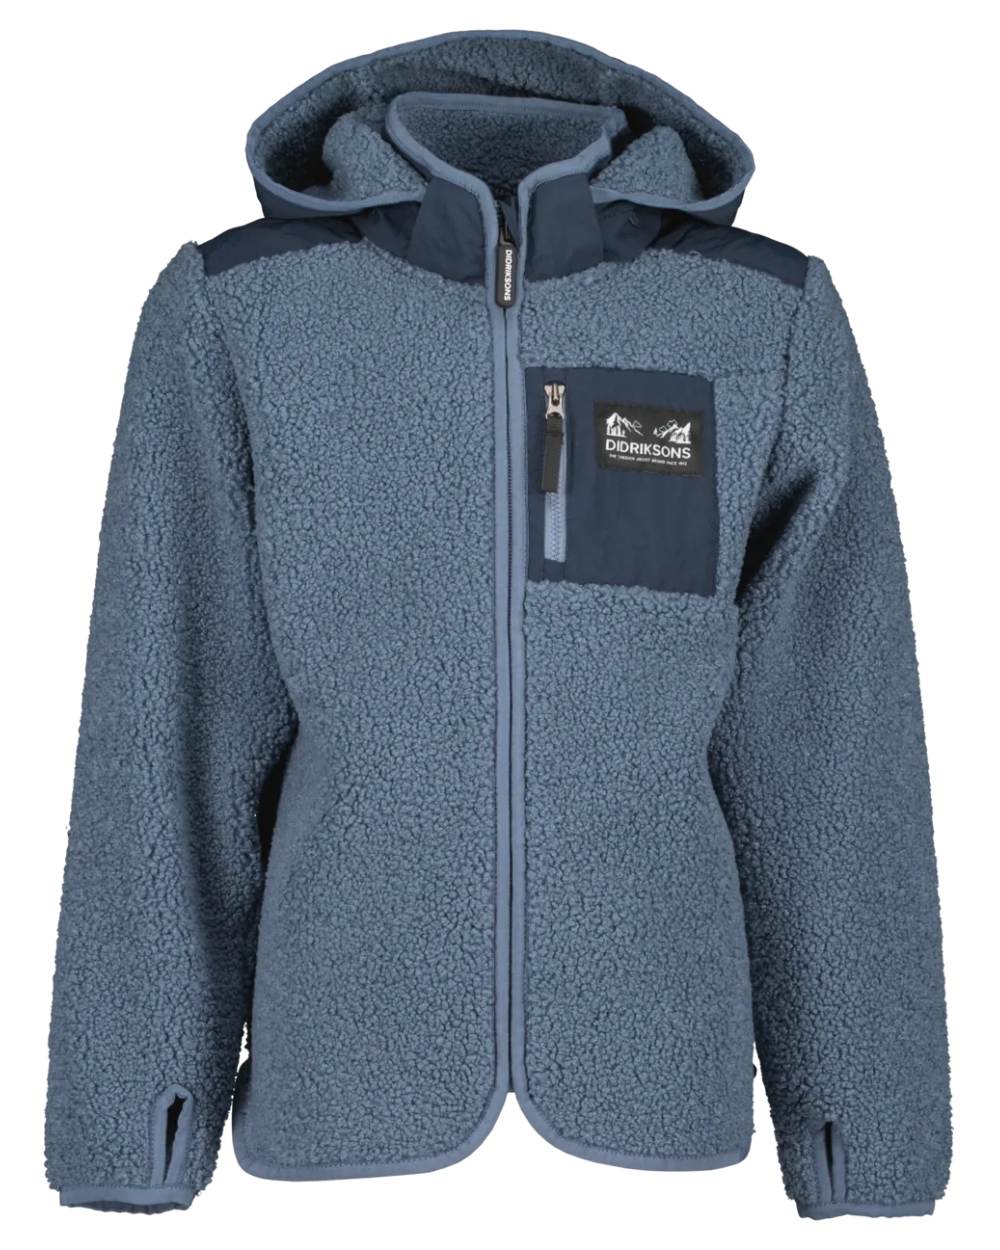 True Blue Coloured Didriksons Exa Childrens Full Zip On A White Background 